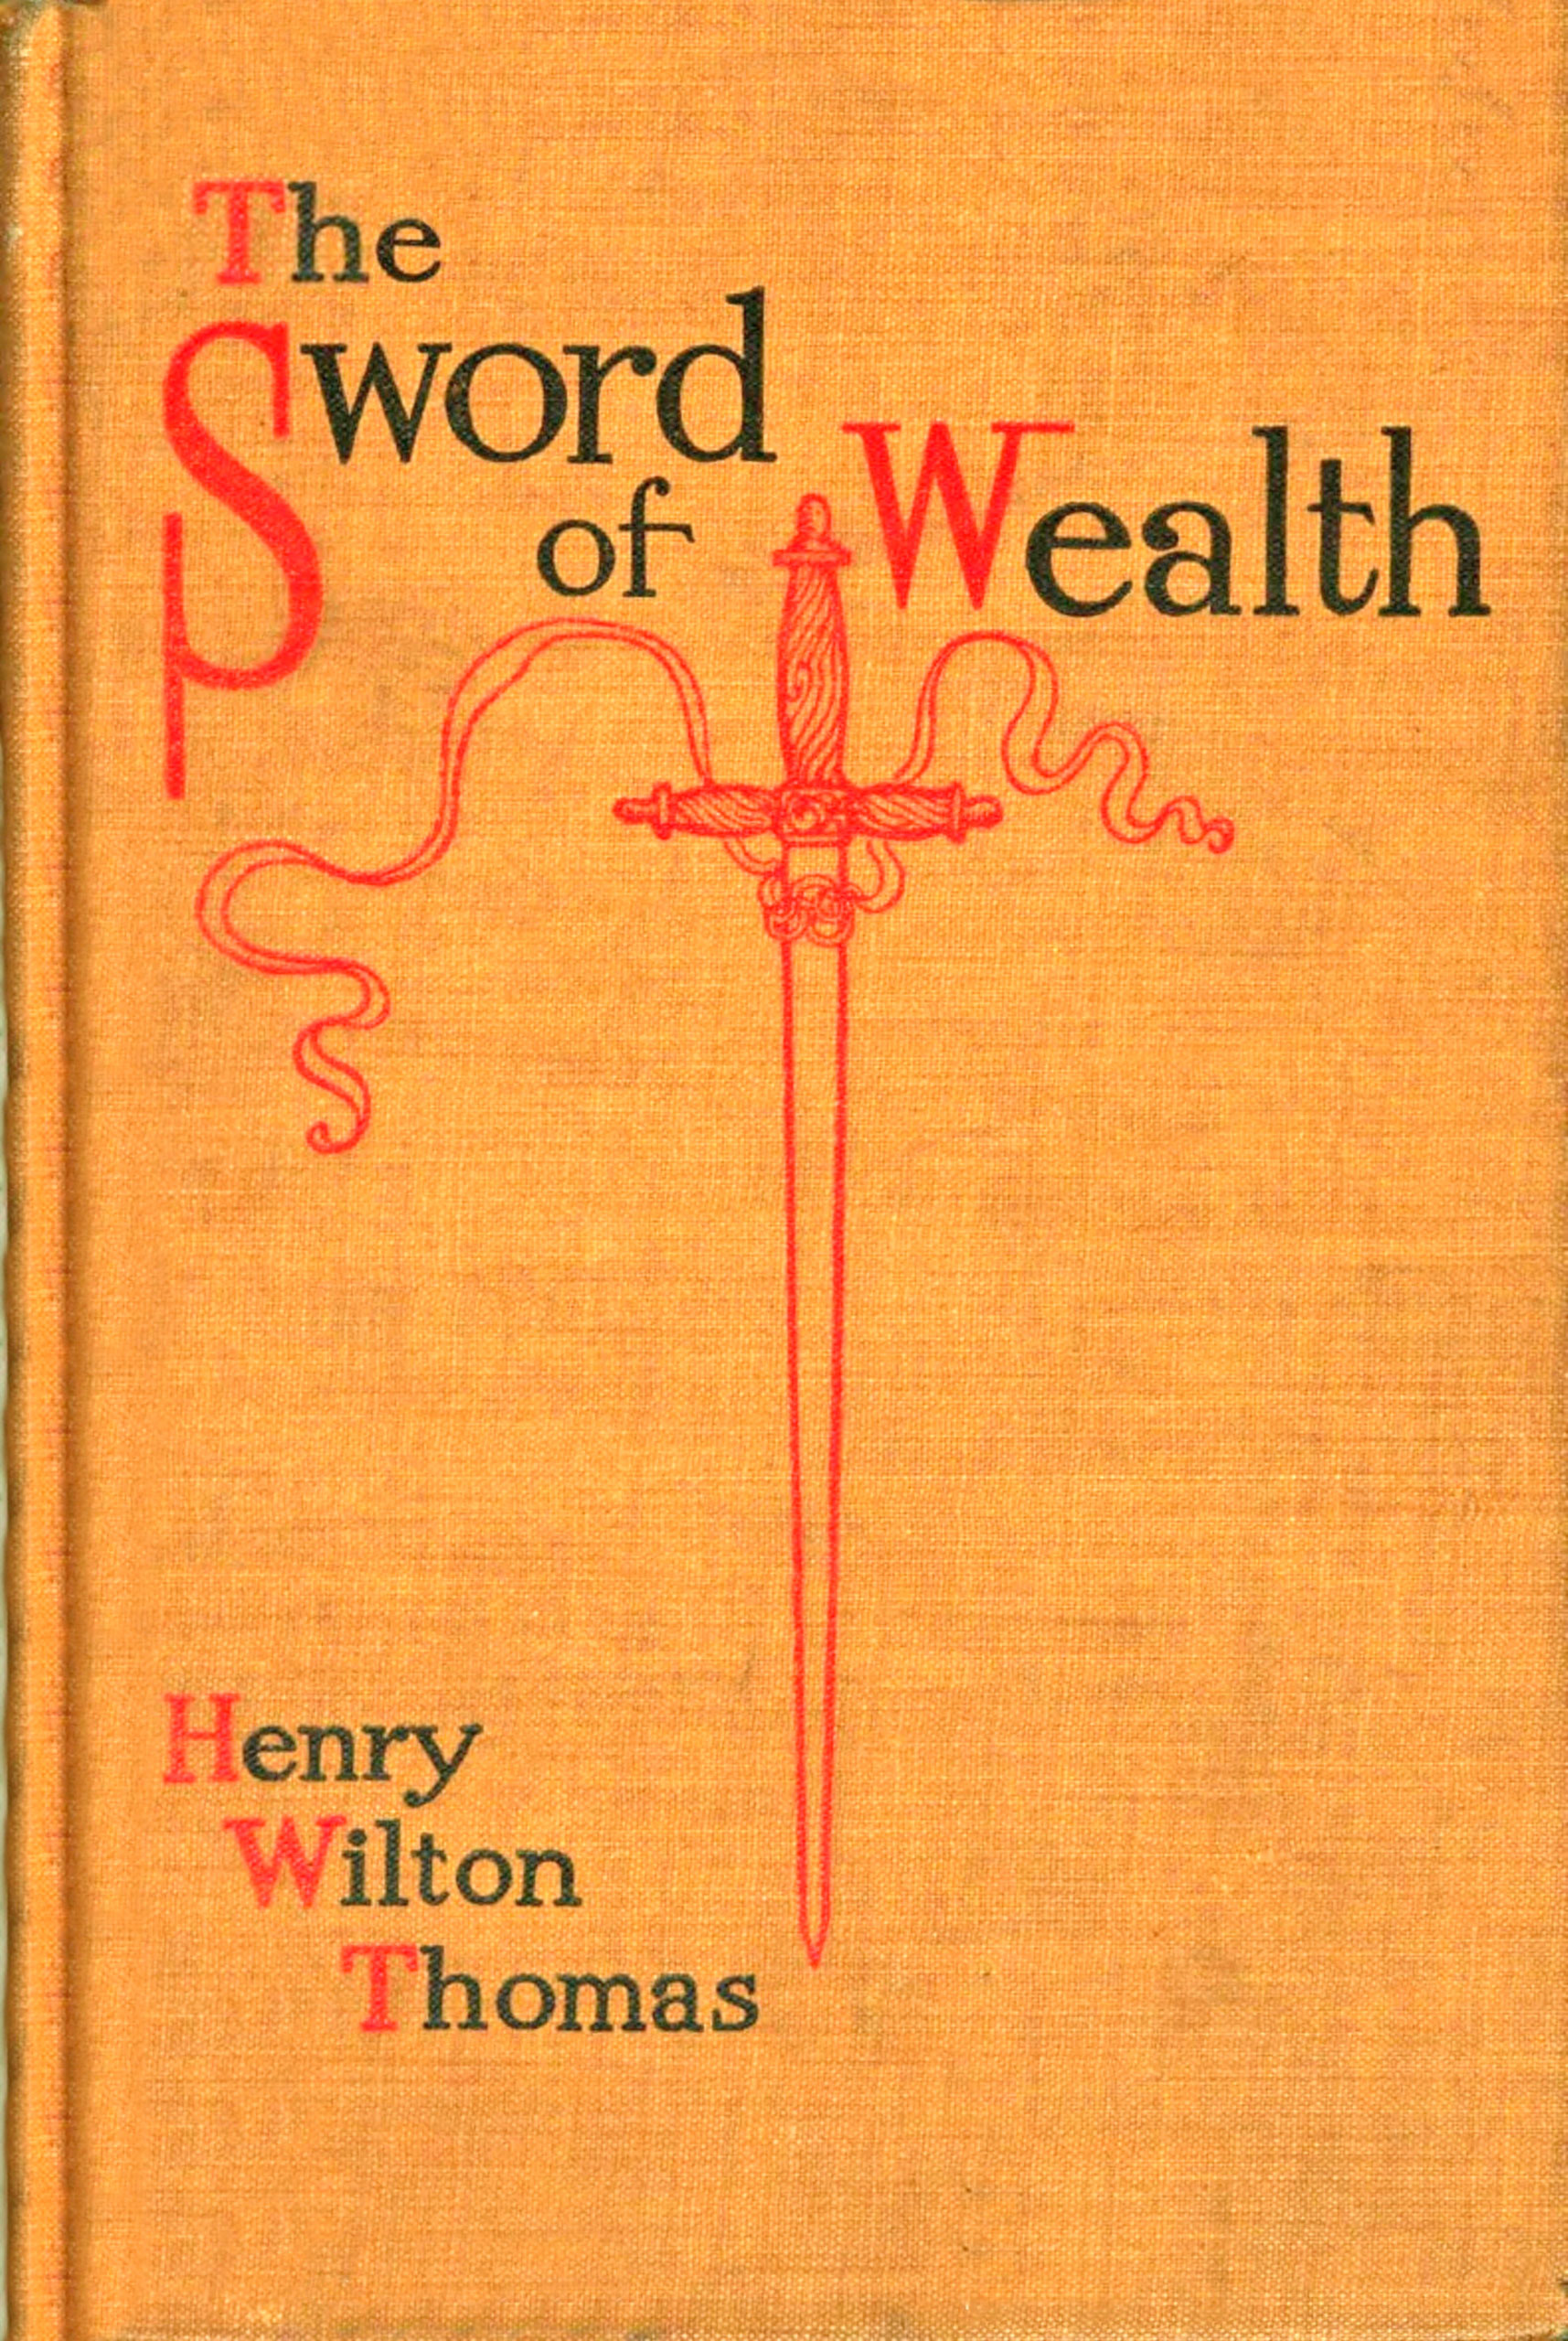 The Sword of Wealth, by Henry Wilton Thomas—A Project Gutenberg eBook